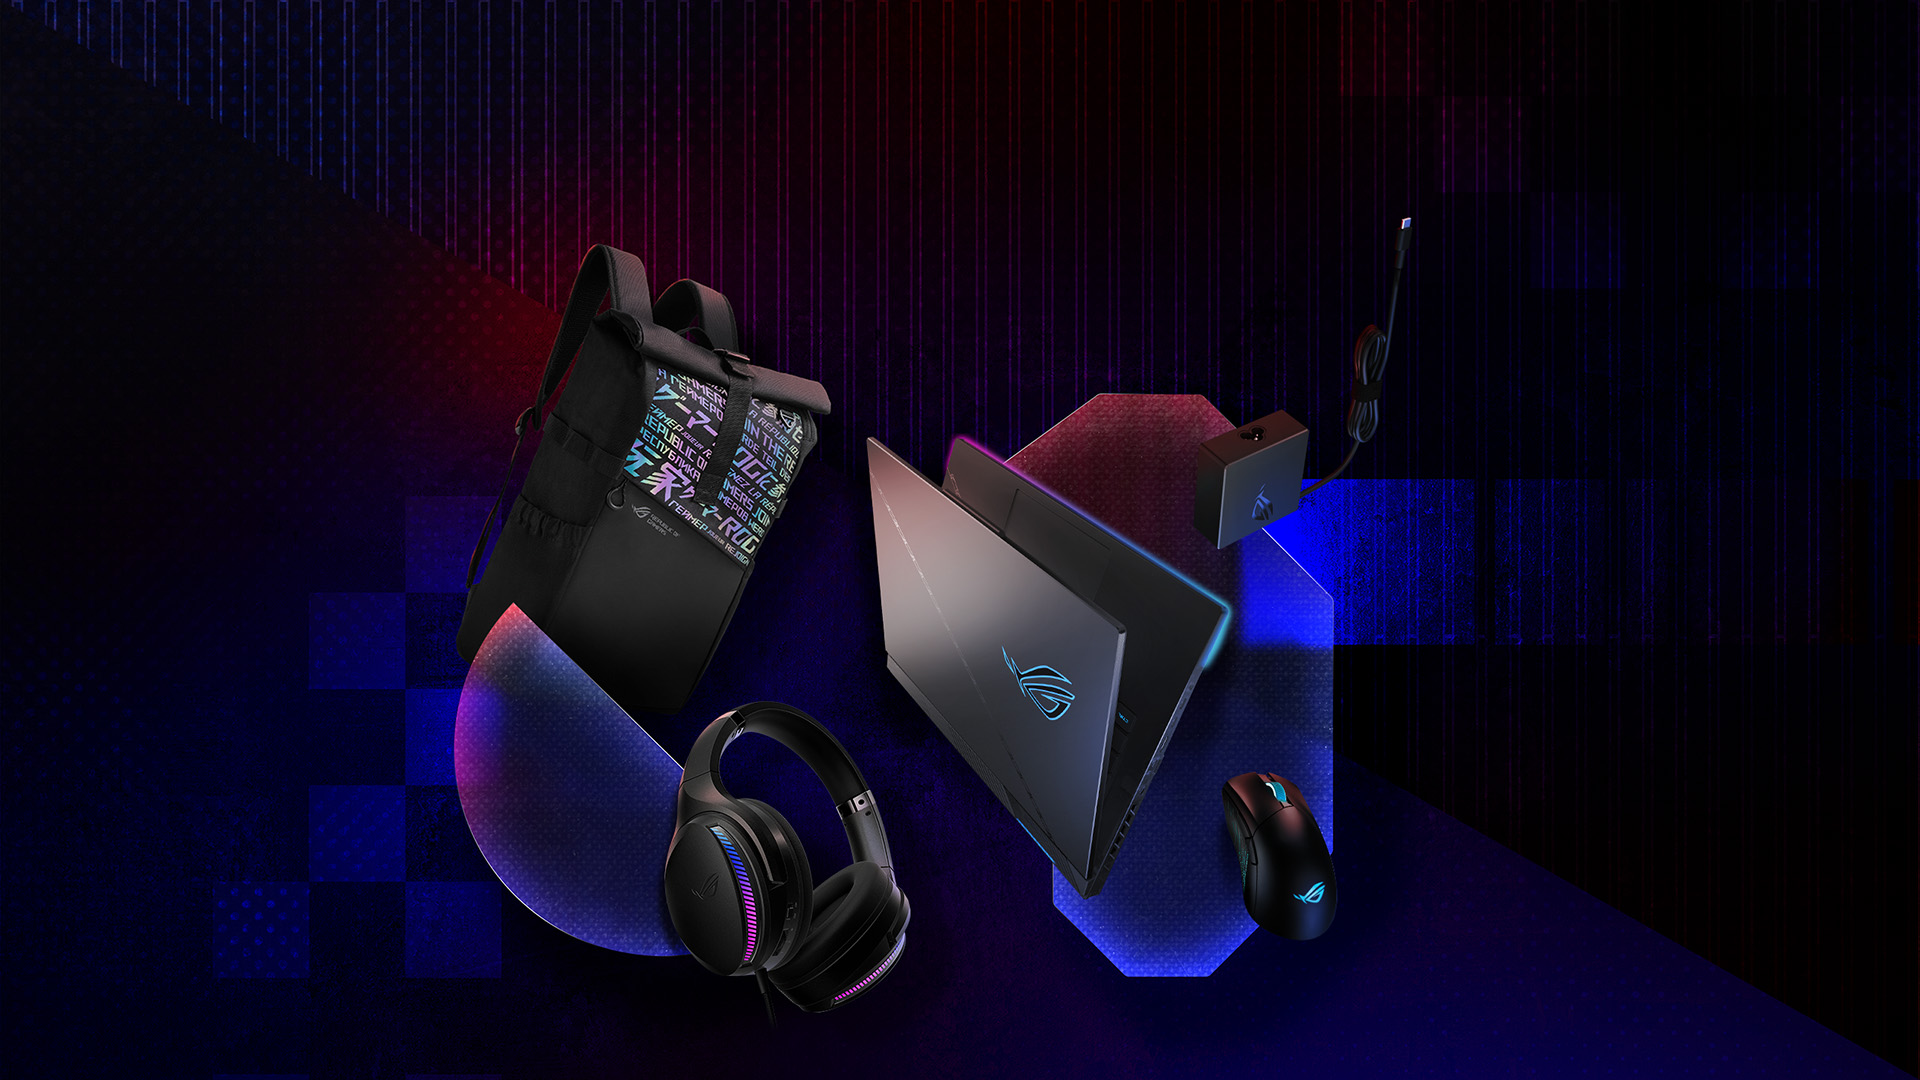 In front of an ROG patterned background, from left to right; an ROG backpack, ROG Fusion II 300 headset, SCAR 18, 100W adapter, and ROG Strix Gladius III mouse.